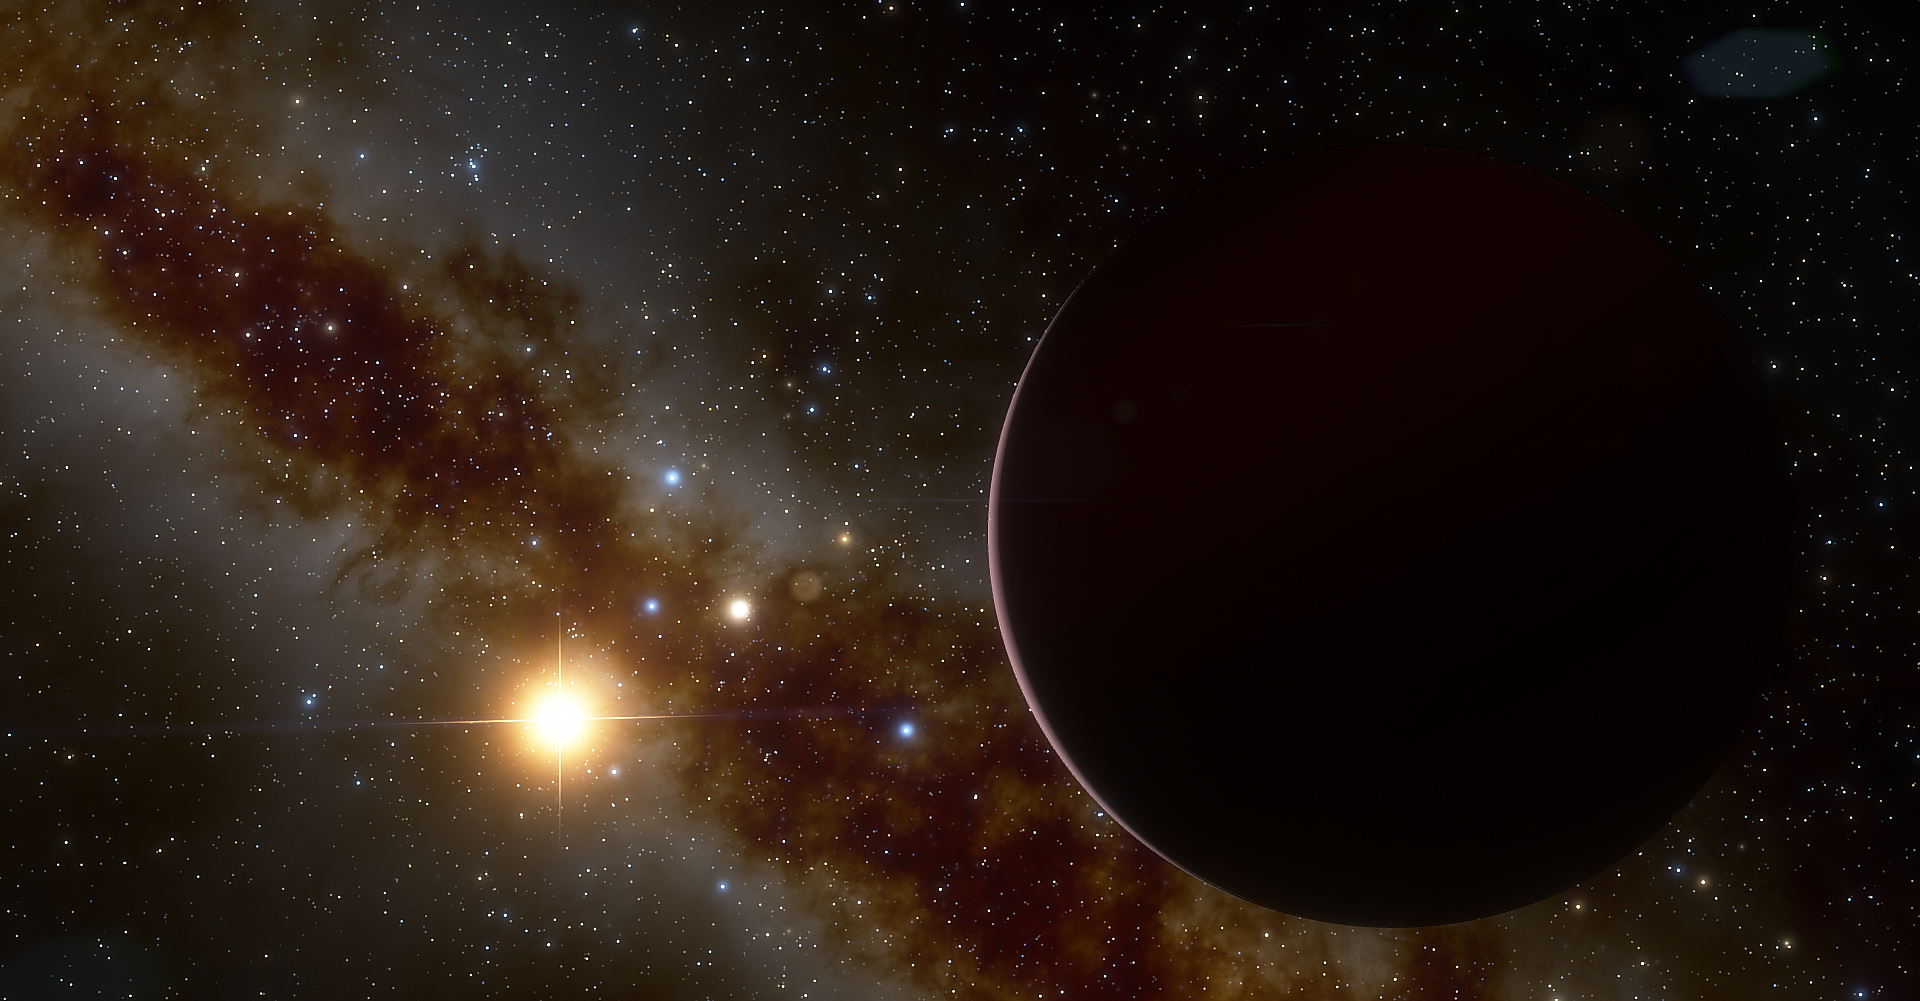 CARMENES: Giant exoplanet around a small star challenges our understanding of how planets form